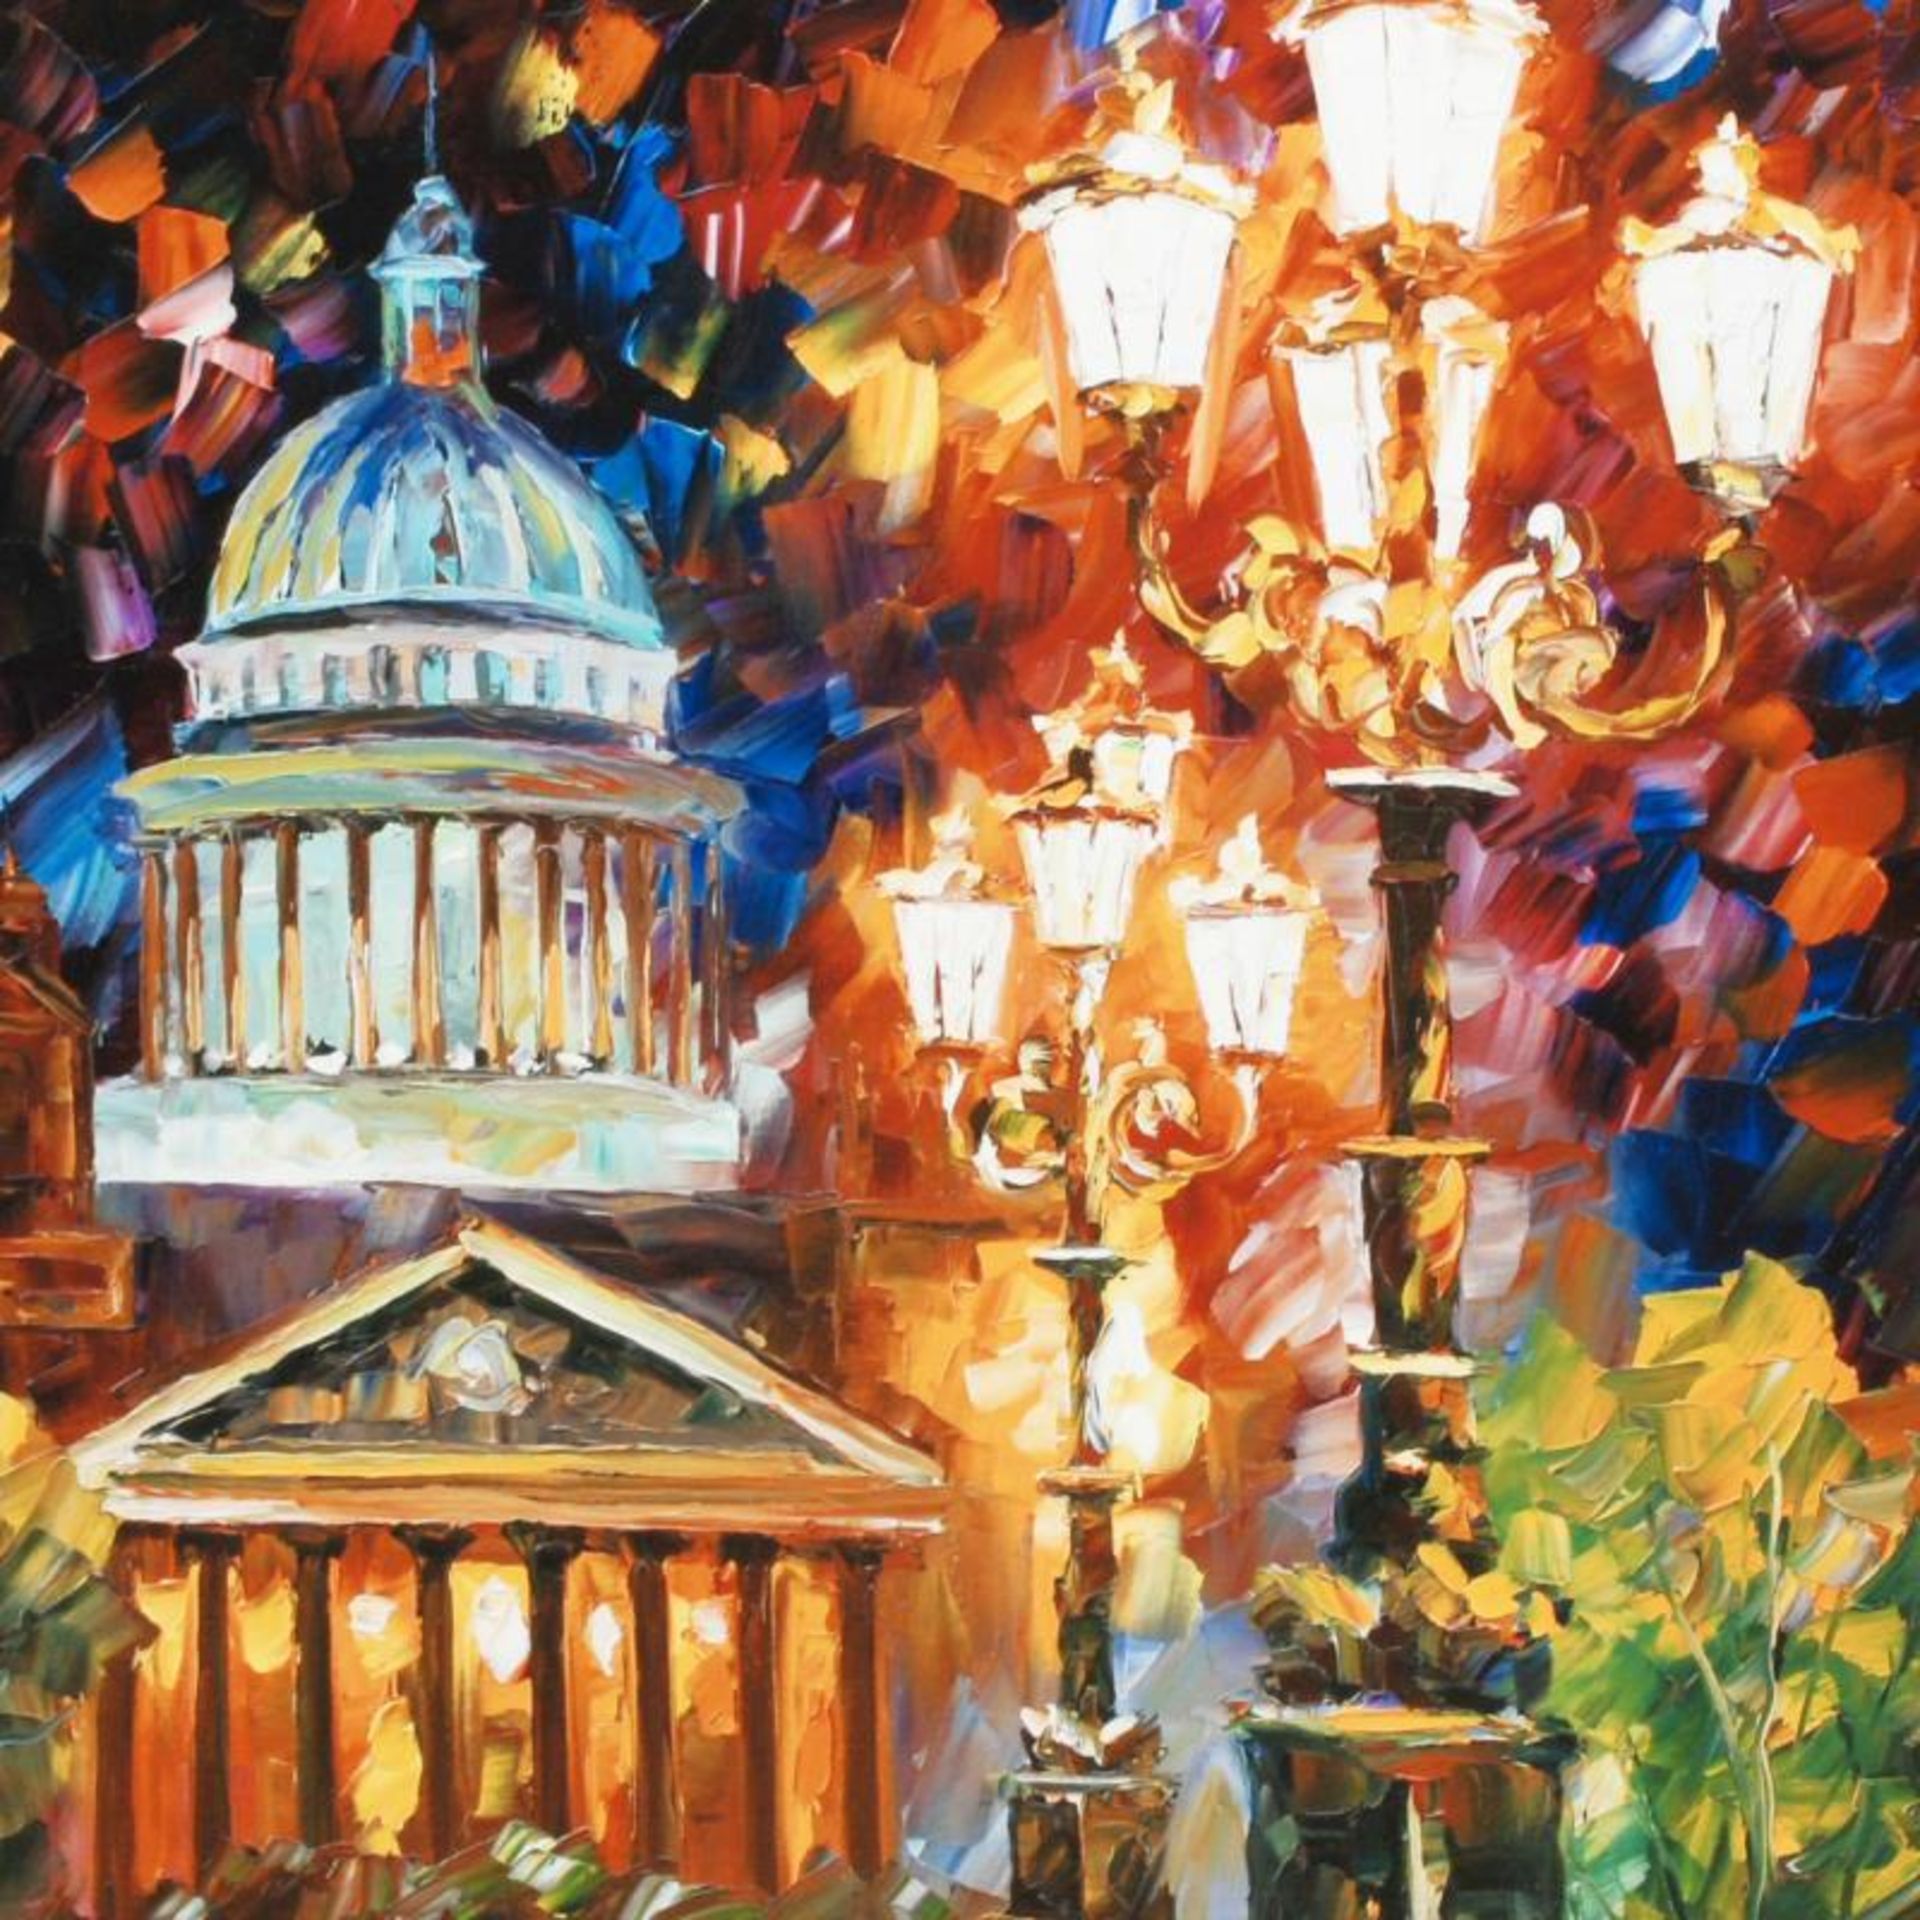 Twinkling of the Night by Afremov (1955-2019) - Image 2 of 3